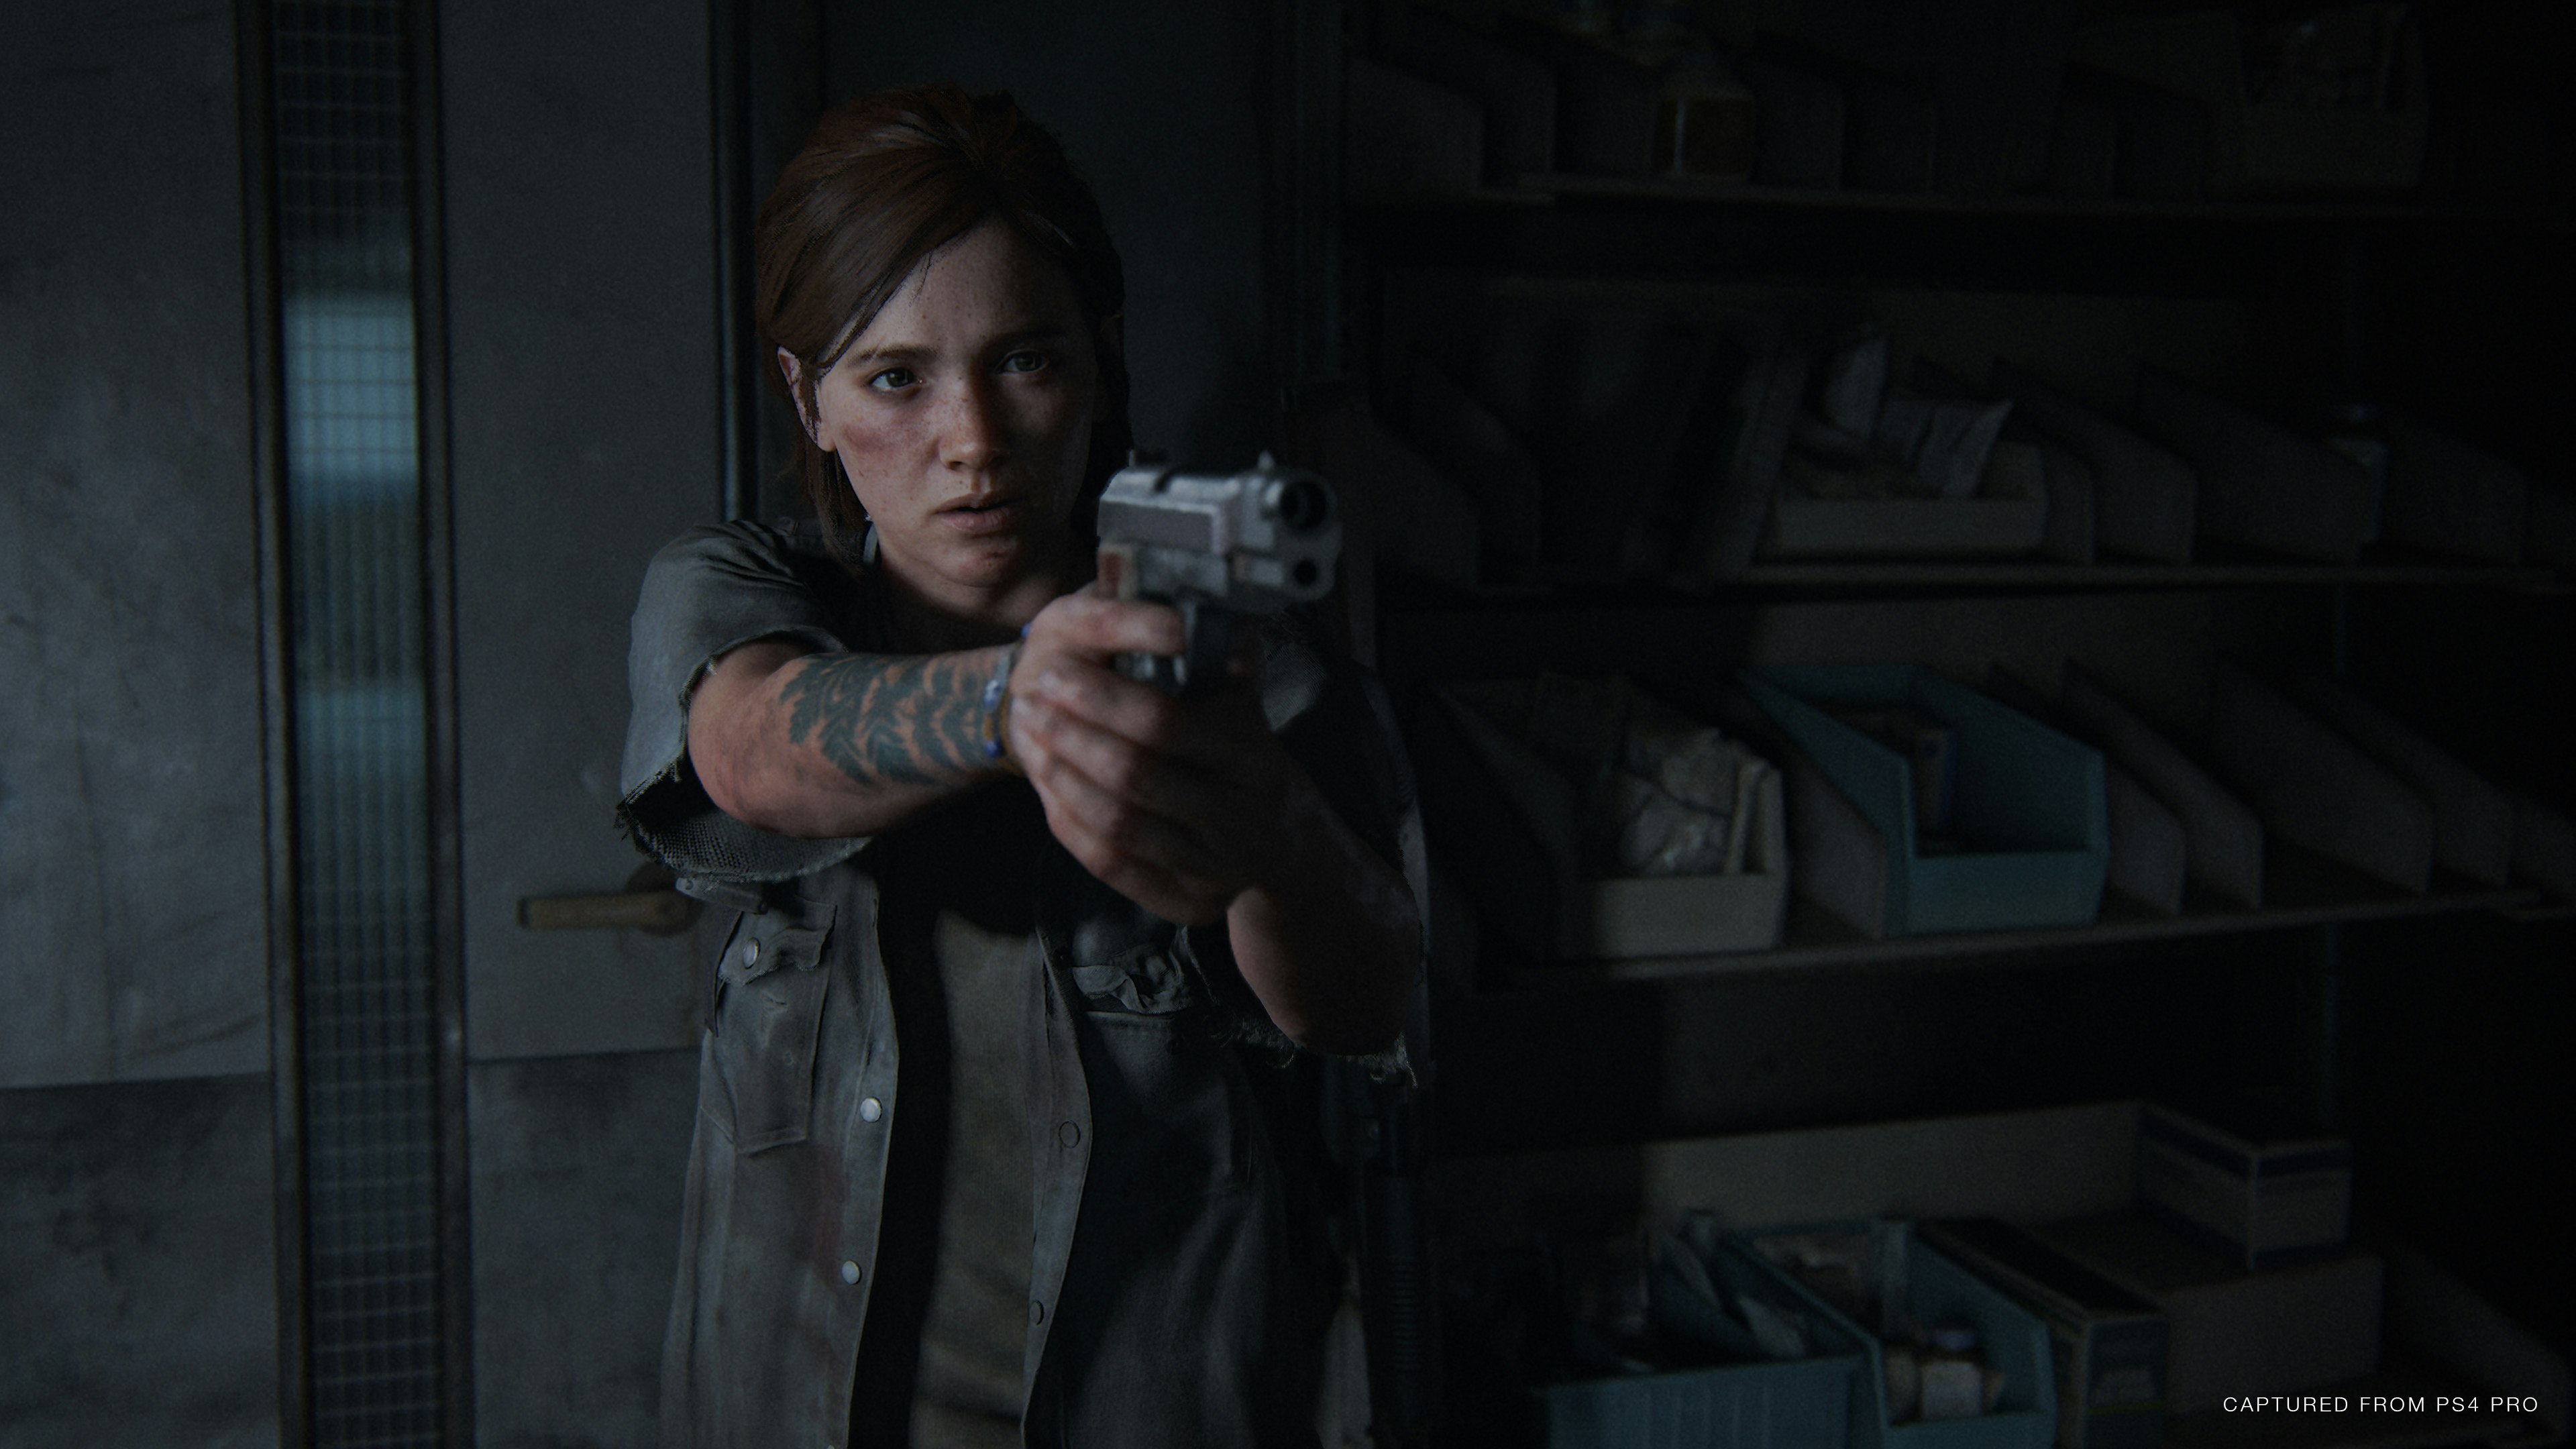 The Last of Us 3' Needs To Give Ellie the Redemption She Deserves